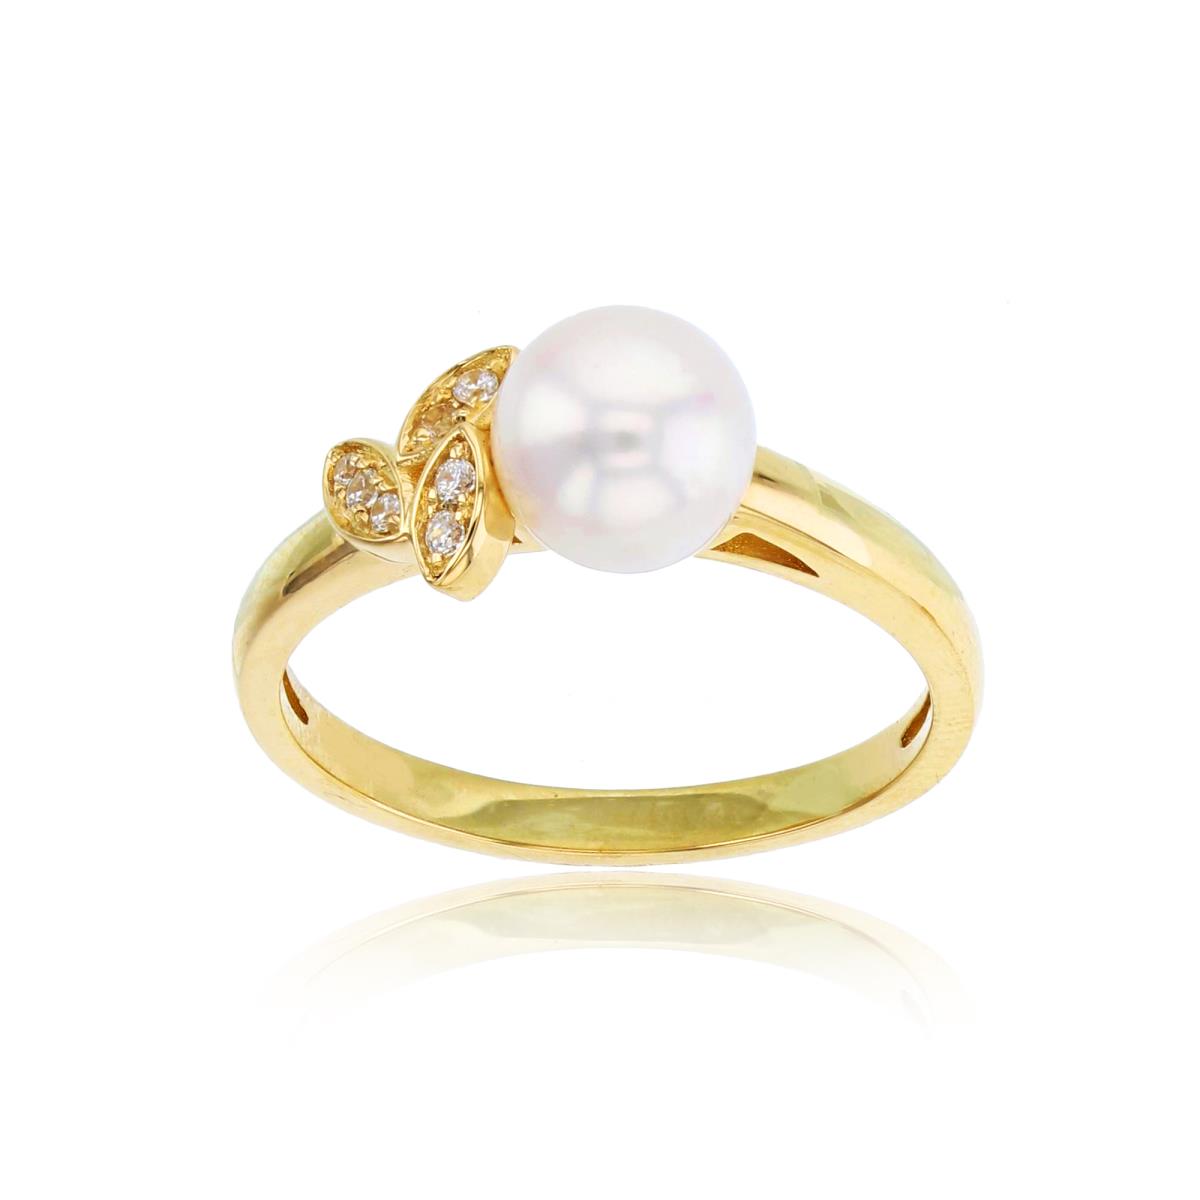 10K Yellow Gold 0.04 CTTW Rnd Diam & 7mm Rnd White Pearl with Leaves Ring